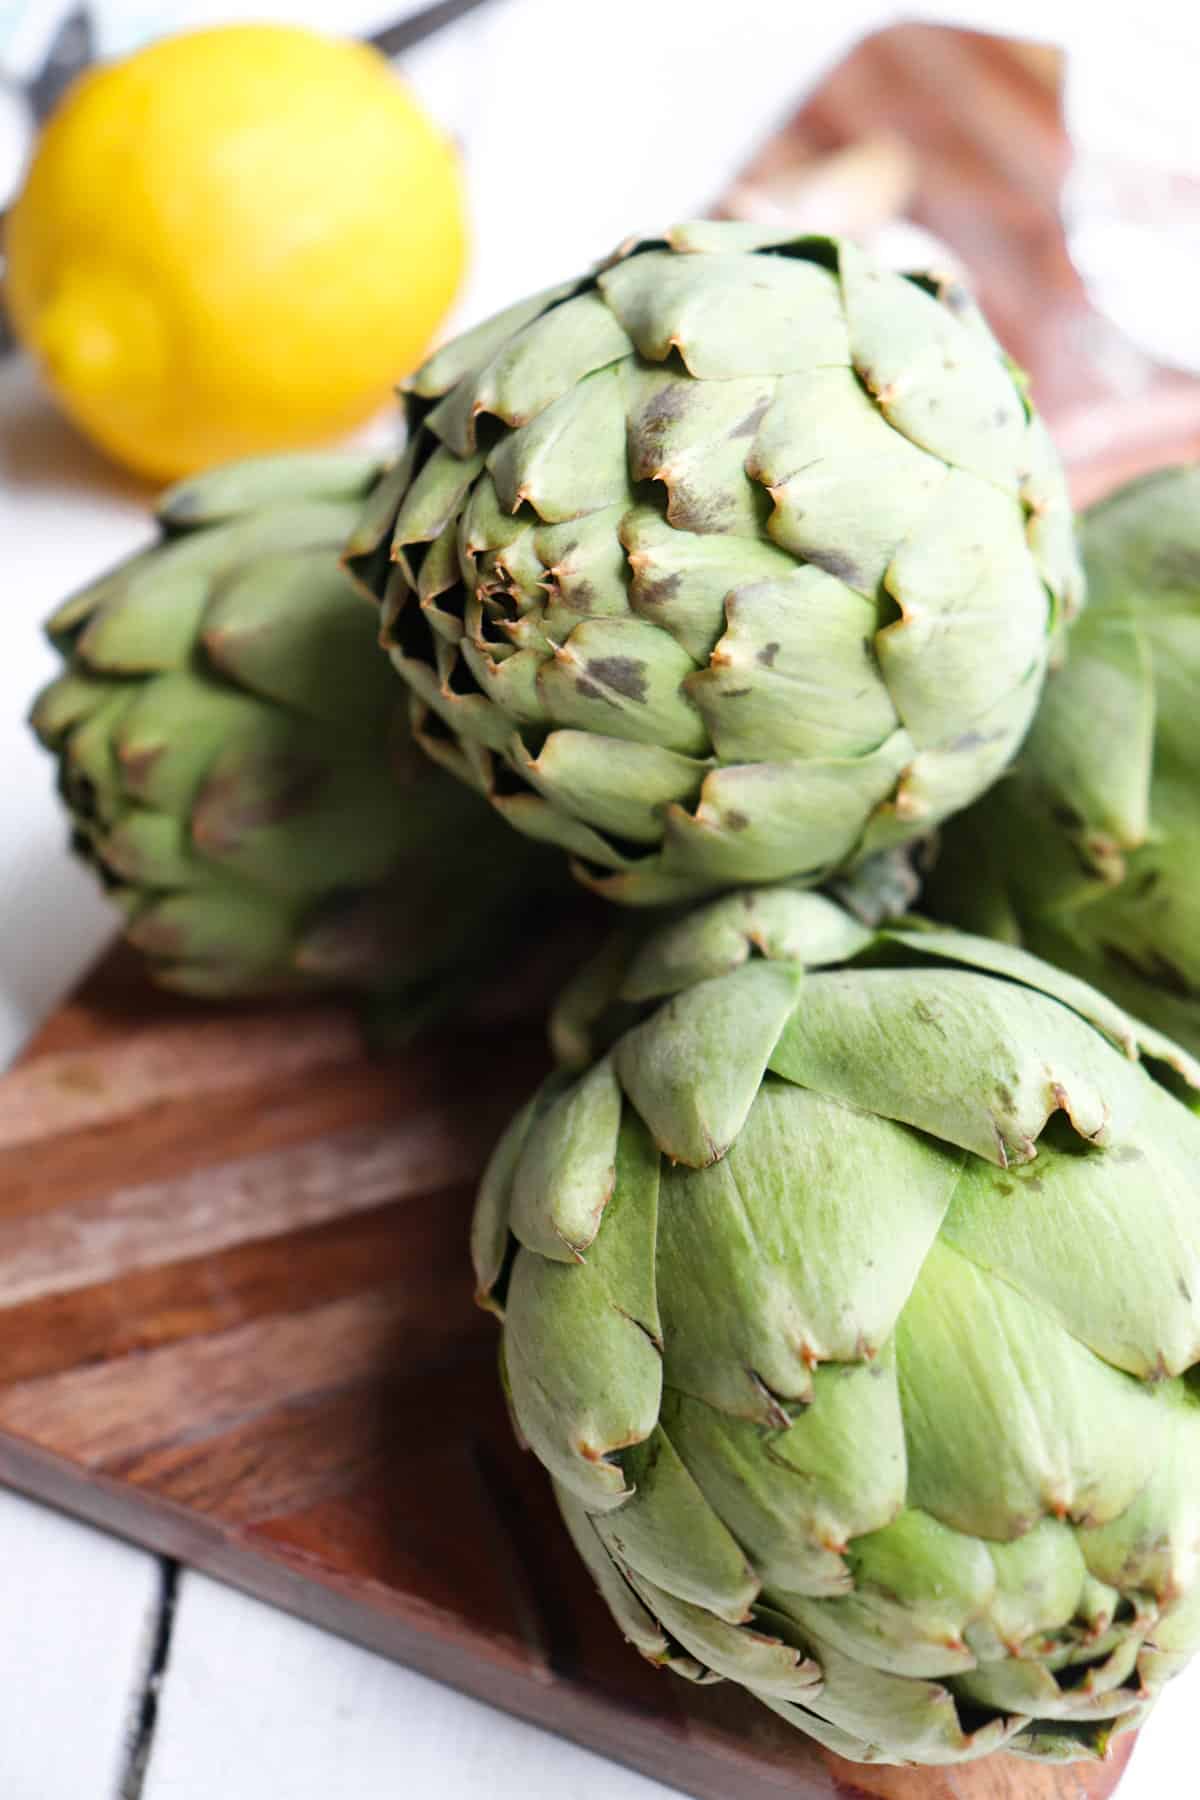 uncooked artichokes on a cutting board.